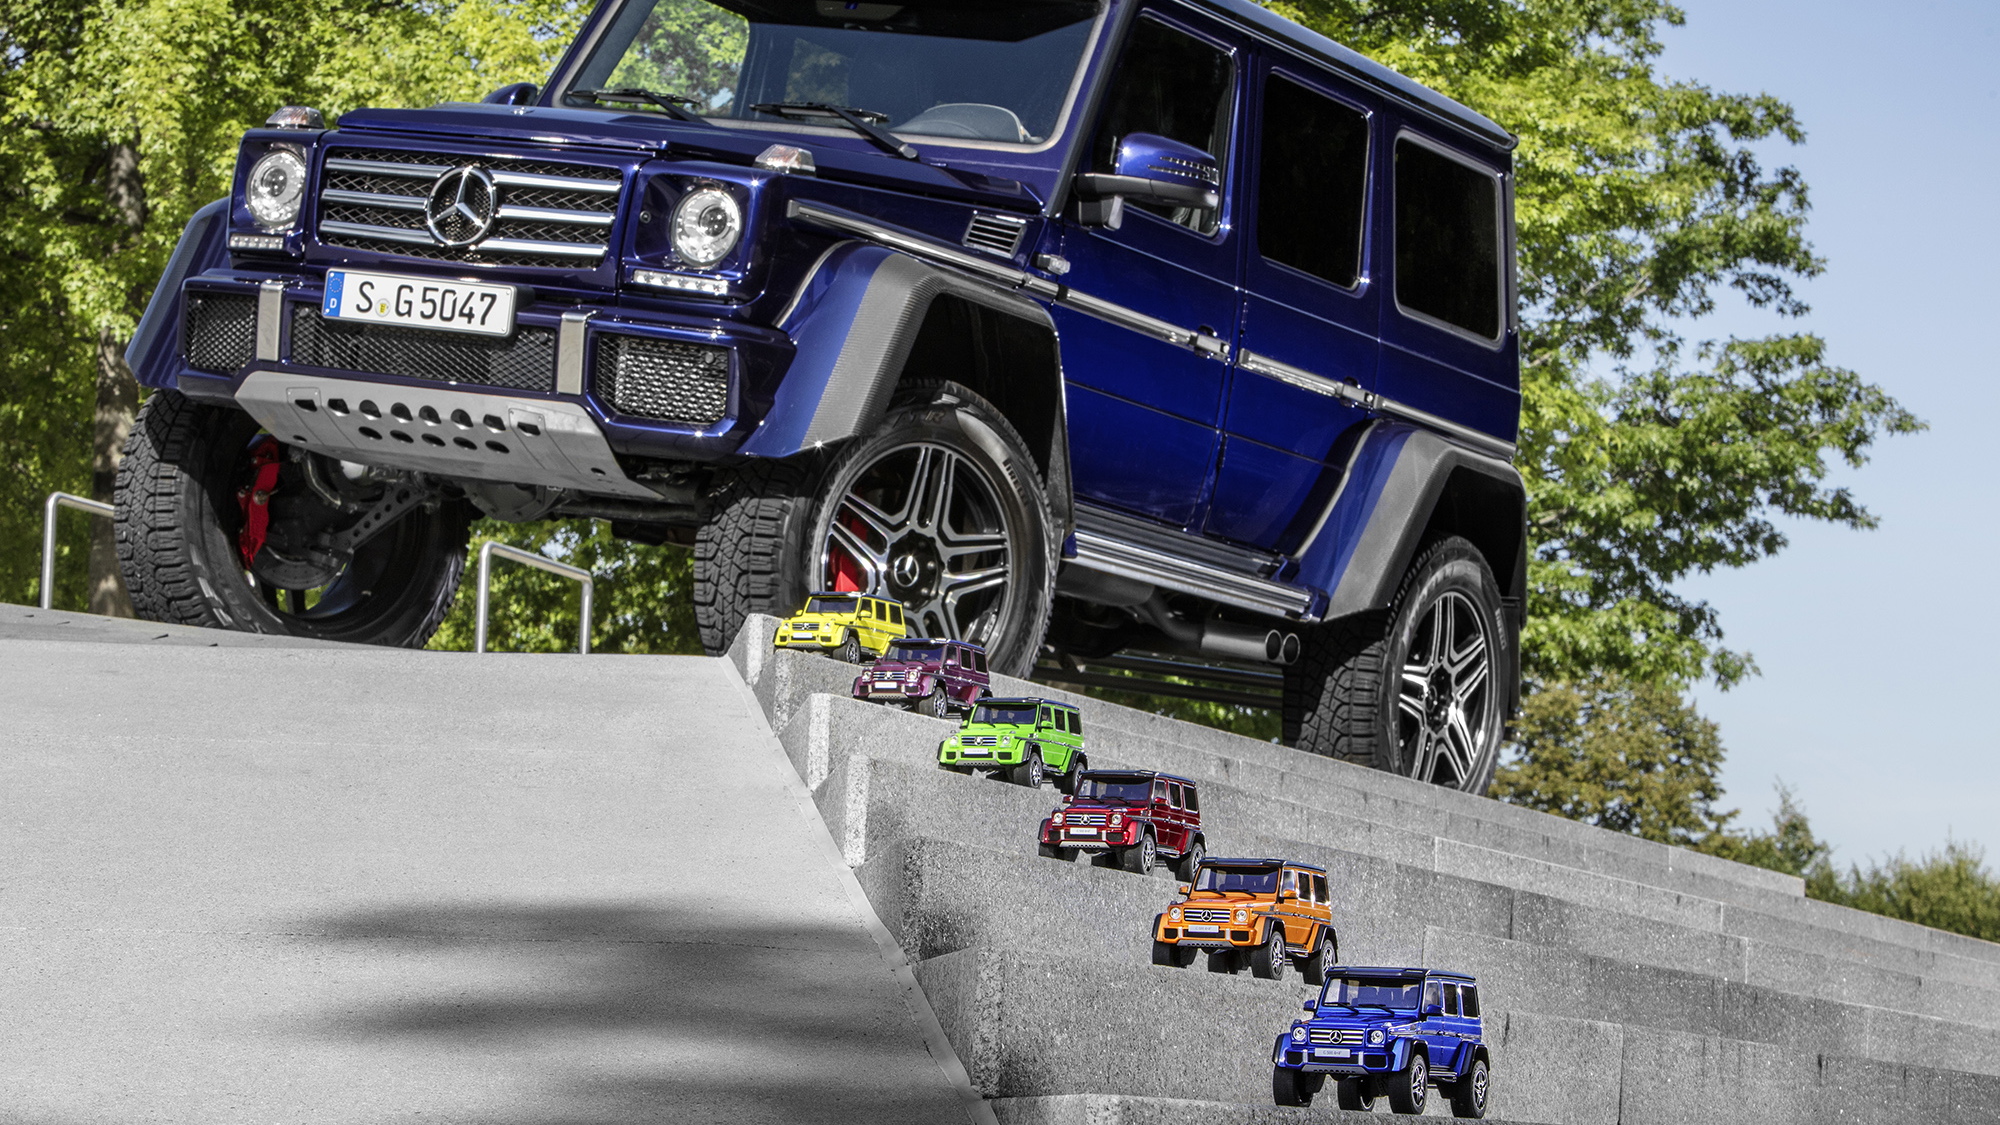 GT Spirit is offering the Mercedes-Benz G500 4x4² in 1:18 scale